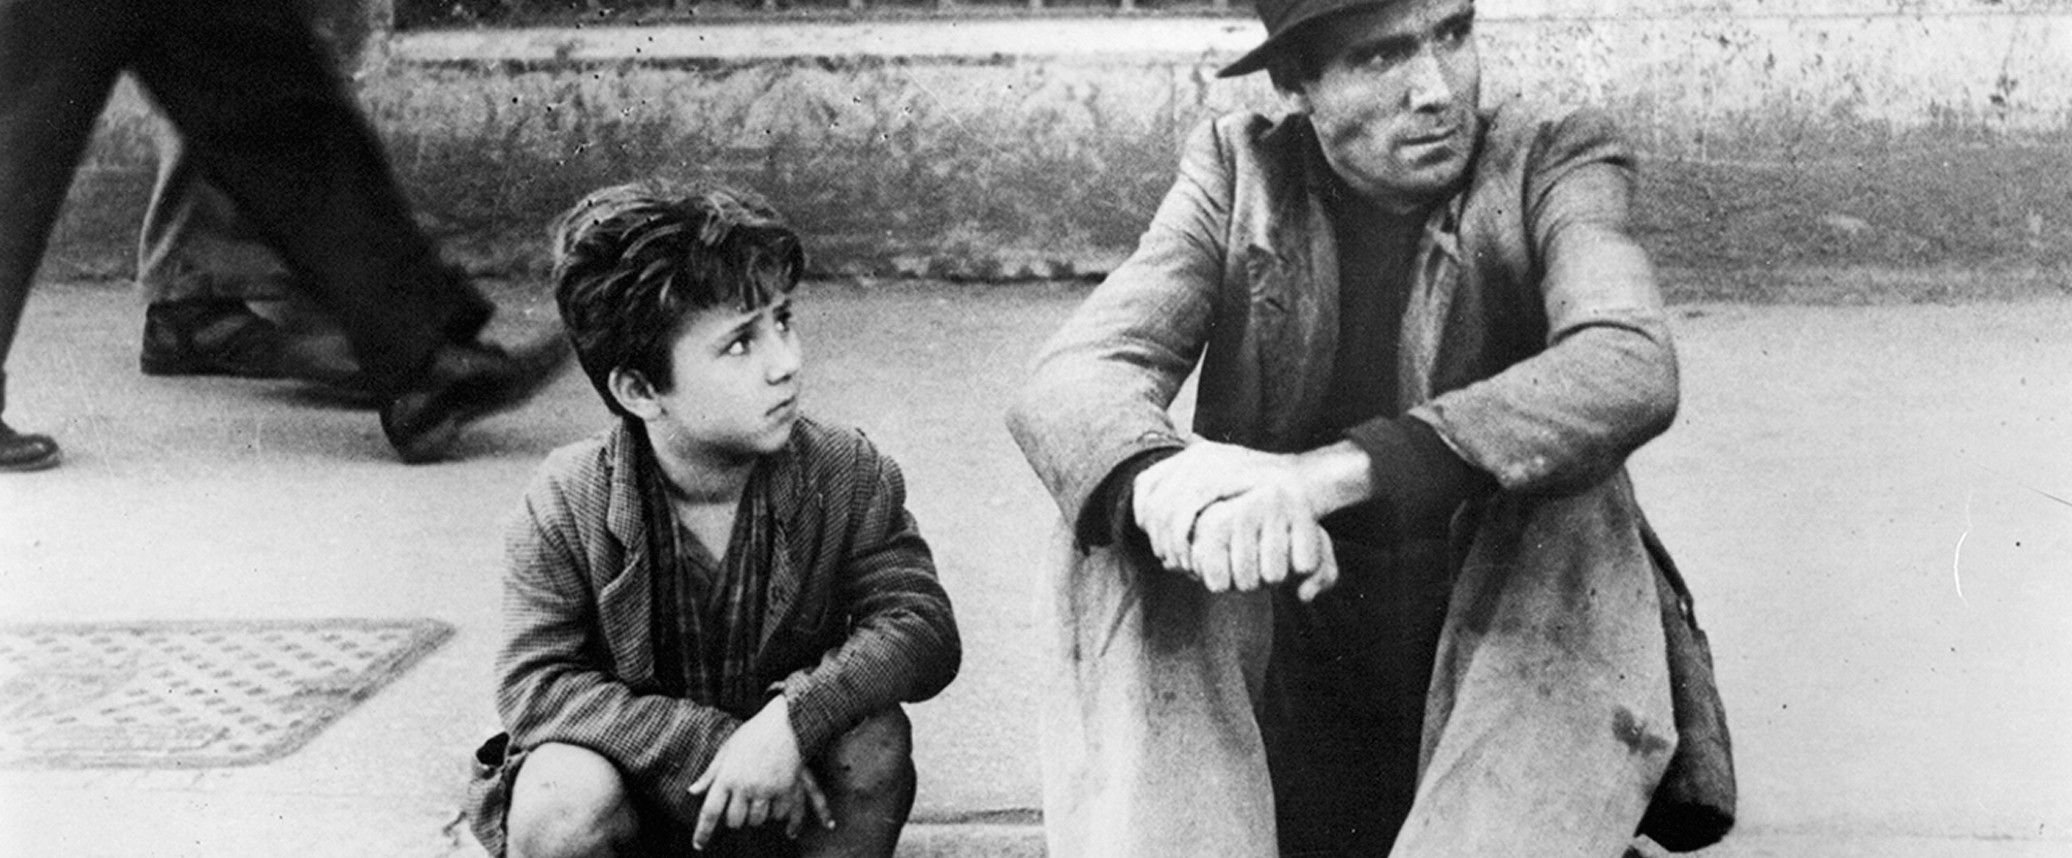 Watch: How Italian Neorealism Brought the Grit of the Streets to the Big Screen2400 x 1350